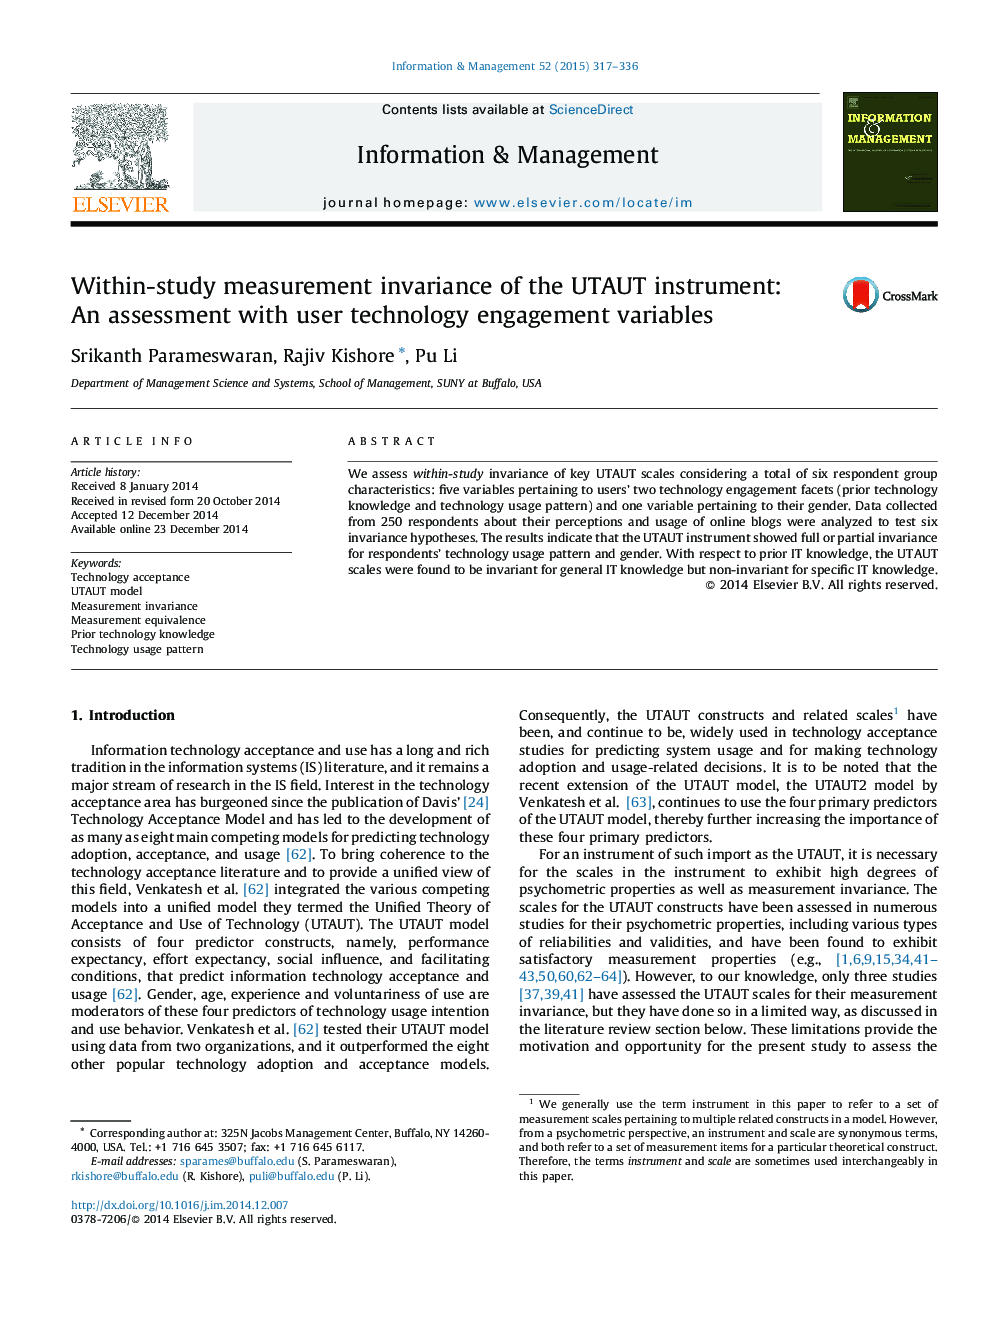 Within-study measurement invariance of the UTAUT instrument: An assessment with user technology engagement variables